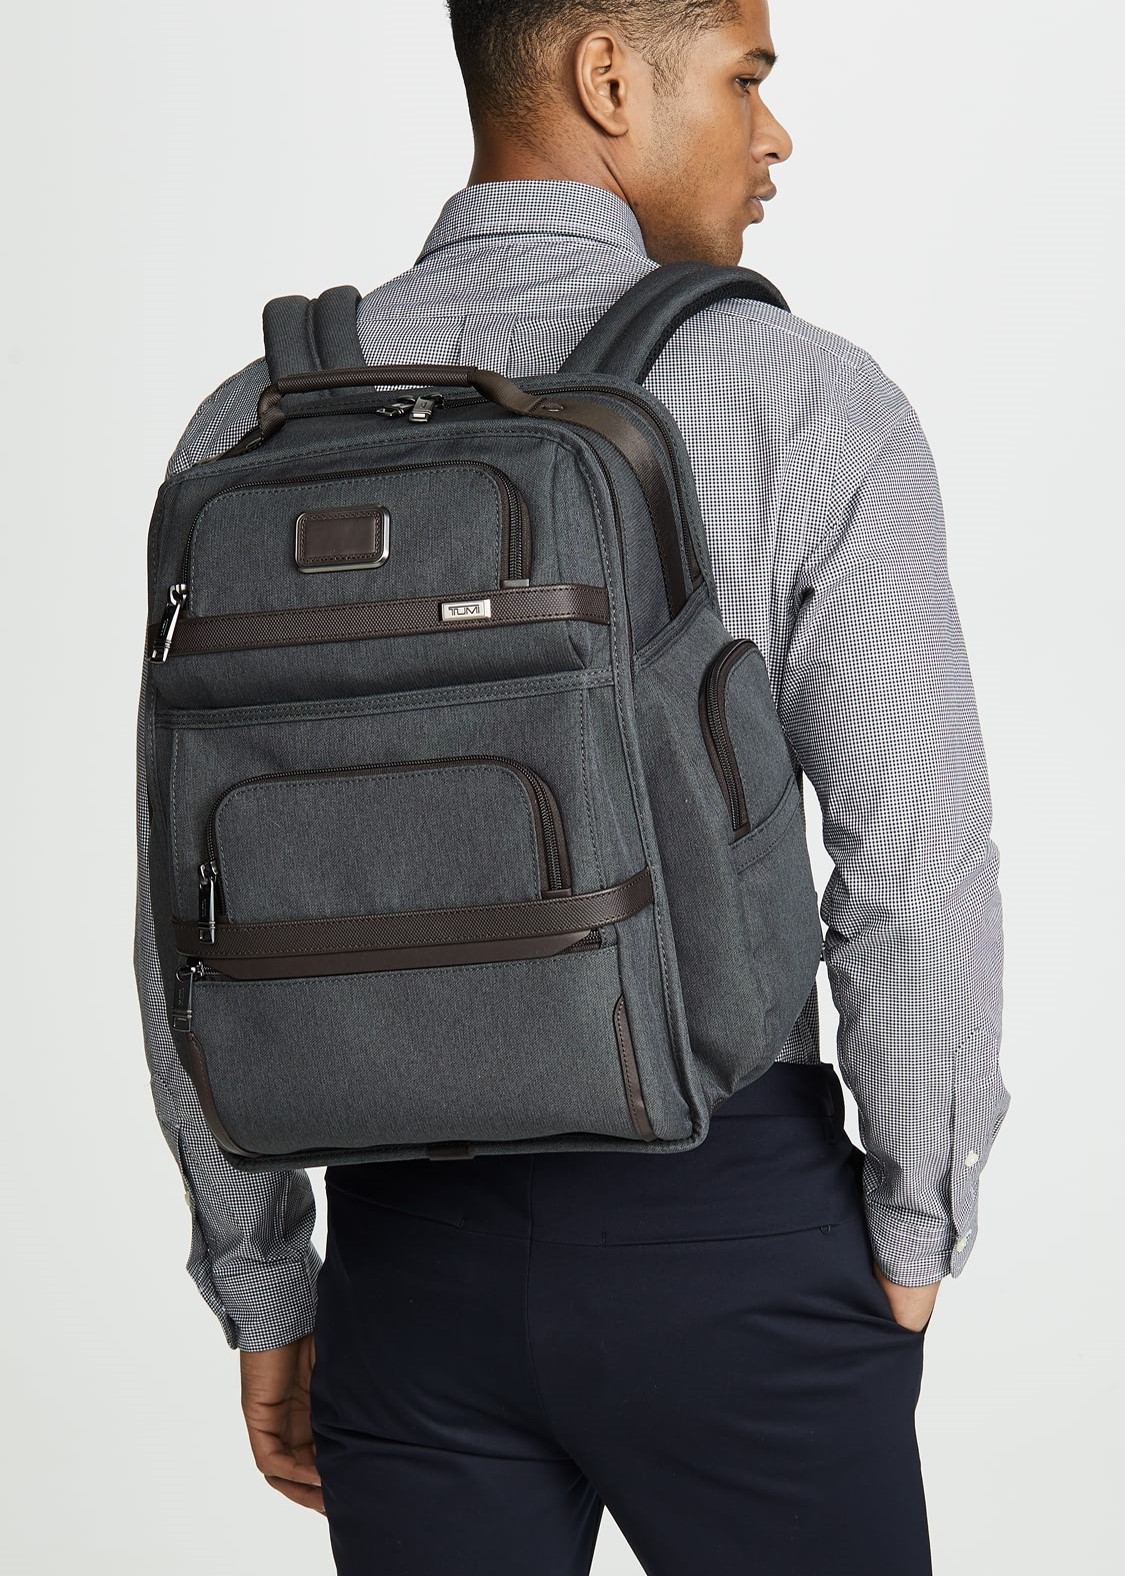 BALO LAPTOP NAM TUMI ALPHA ANTHRACITE BRIEF BACKPACK FOR MEN 8